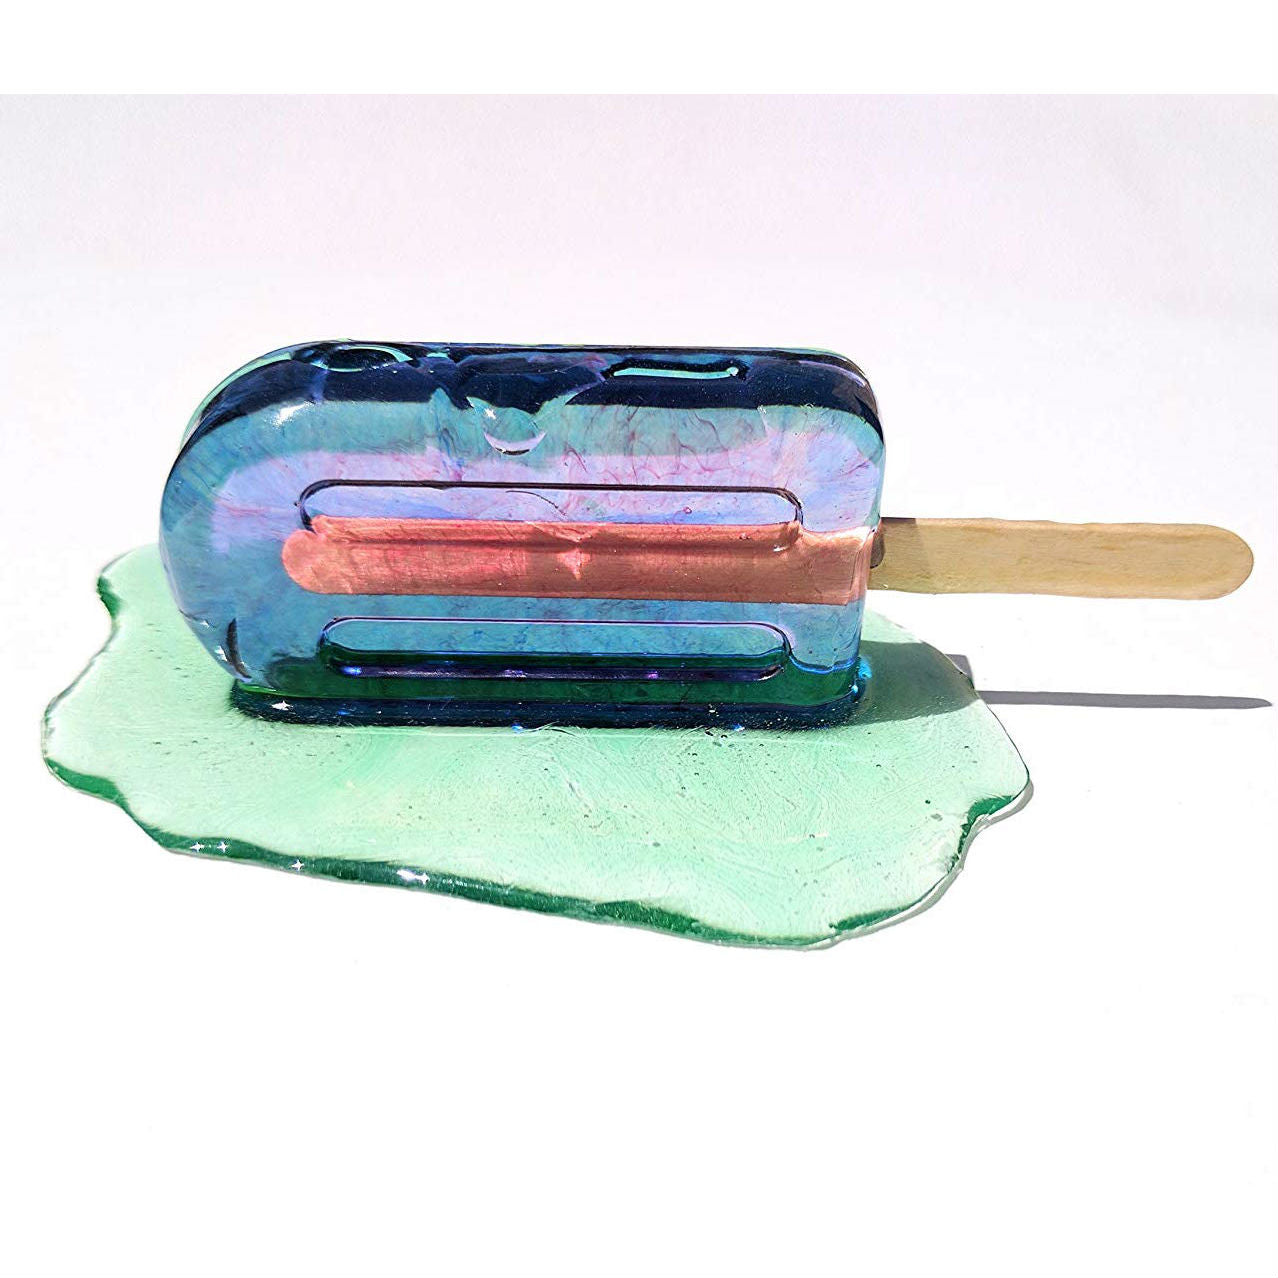 Blueberry Popsicle Sculpture - OddGifts.com